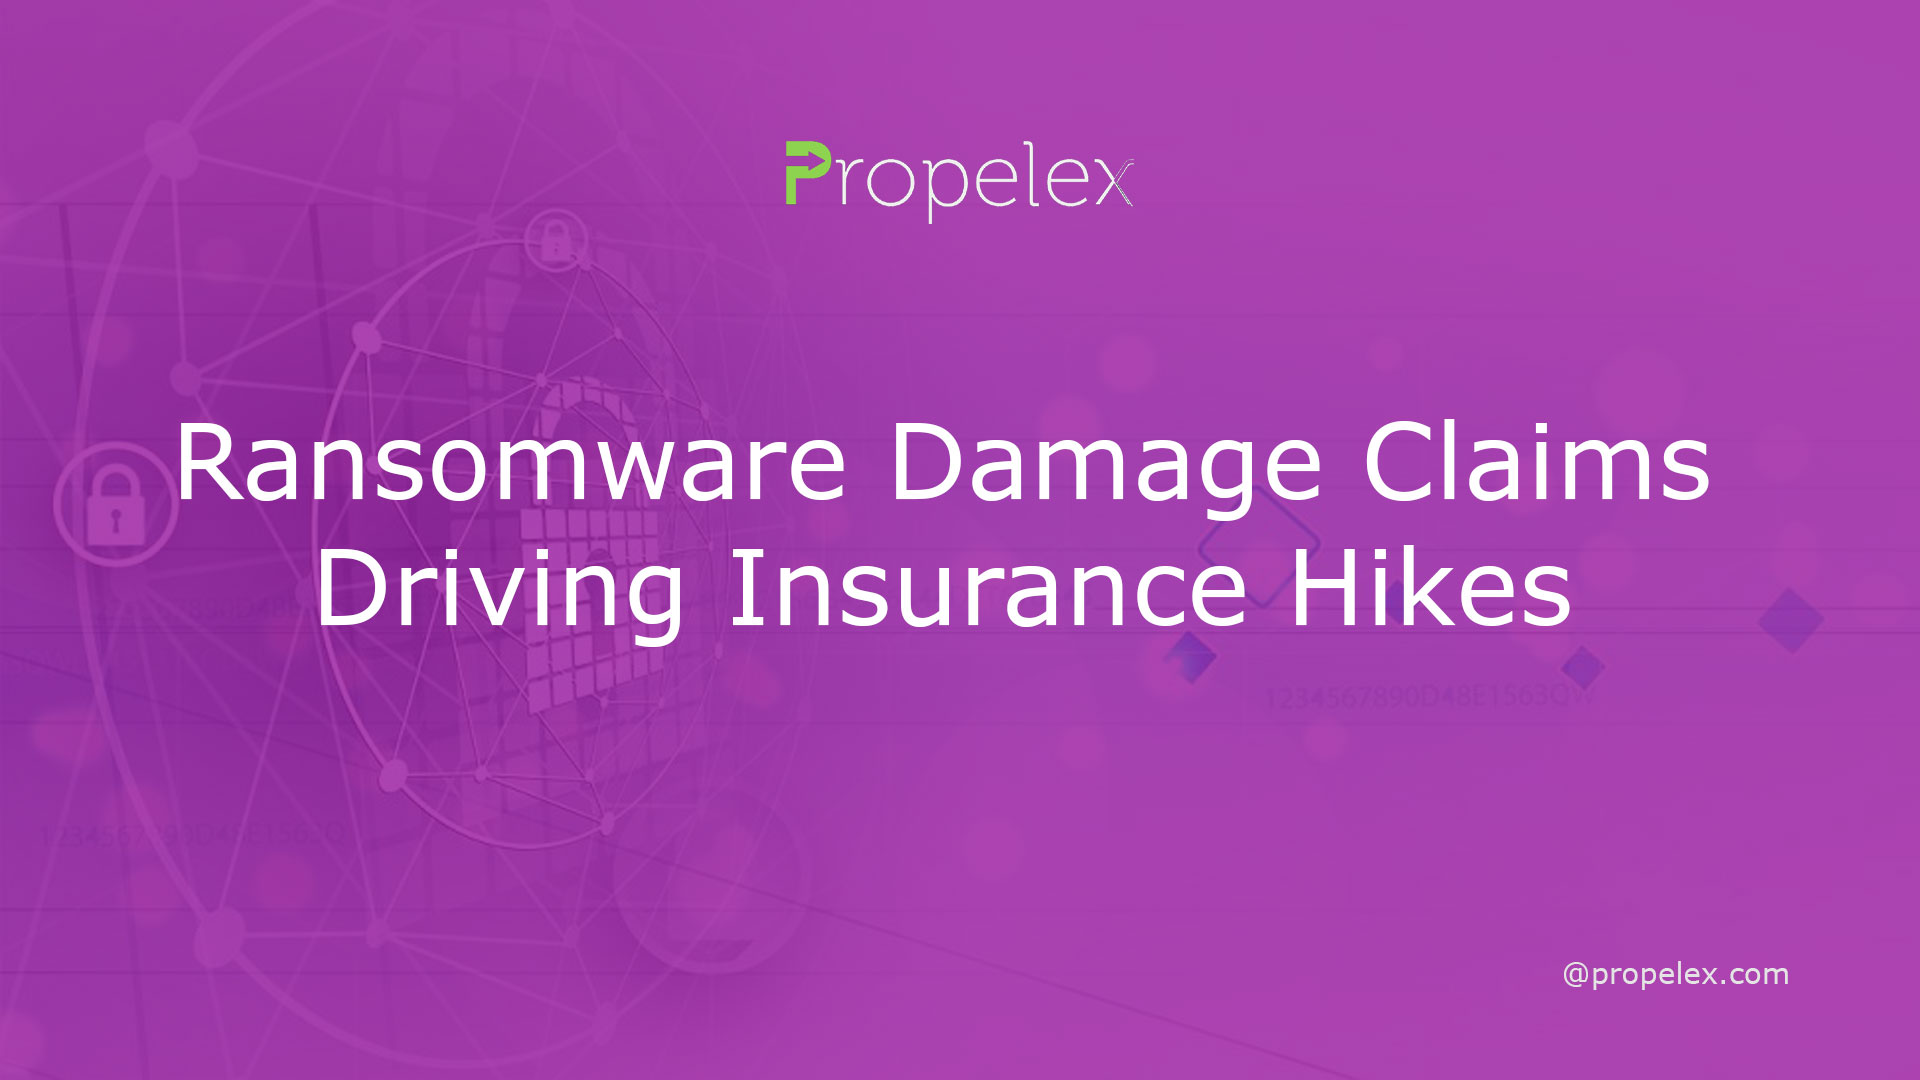 Ransomware Damage Claims Driving Insurance Hikes